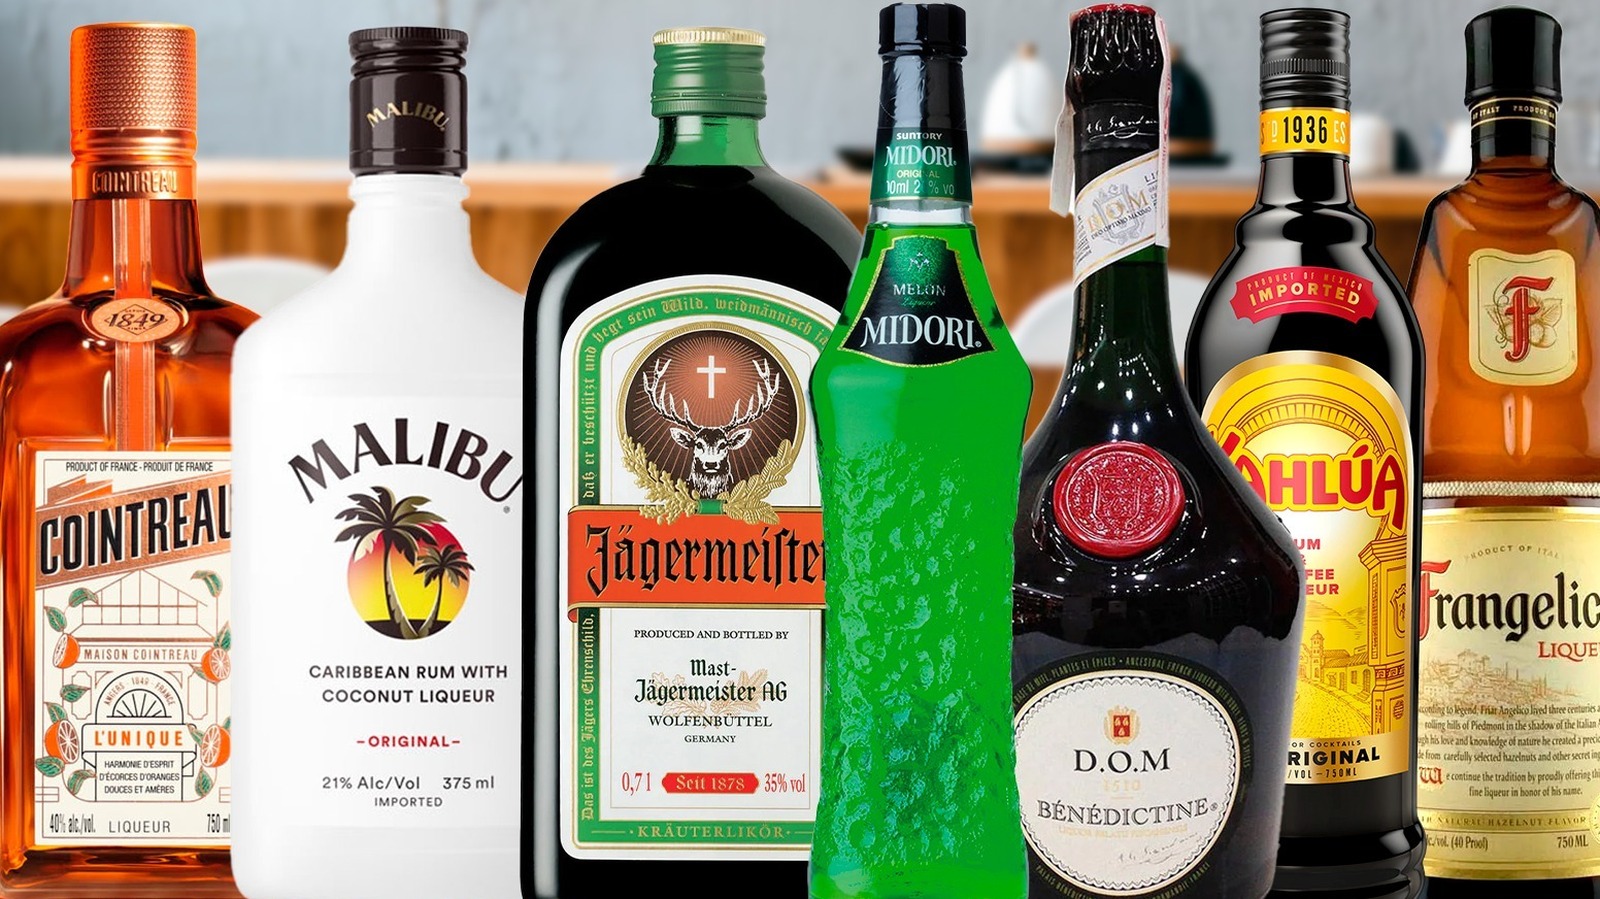 https://www.thedailymeal.com/img/gallery/14-liqueurs-to-keep-stocked-in-your-home-bar/l-intro-1682608205.jpg